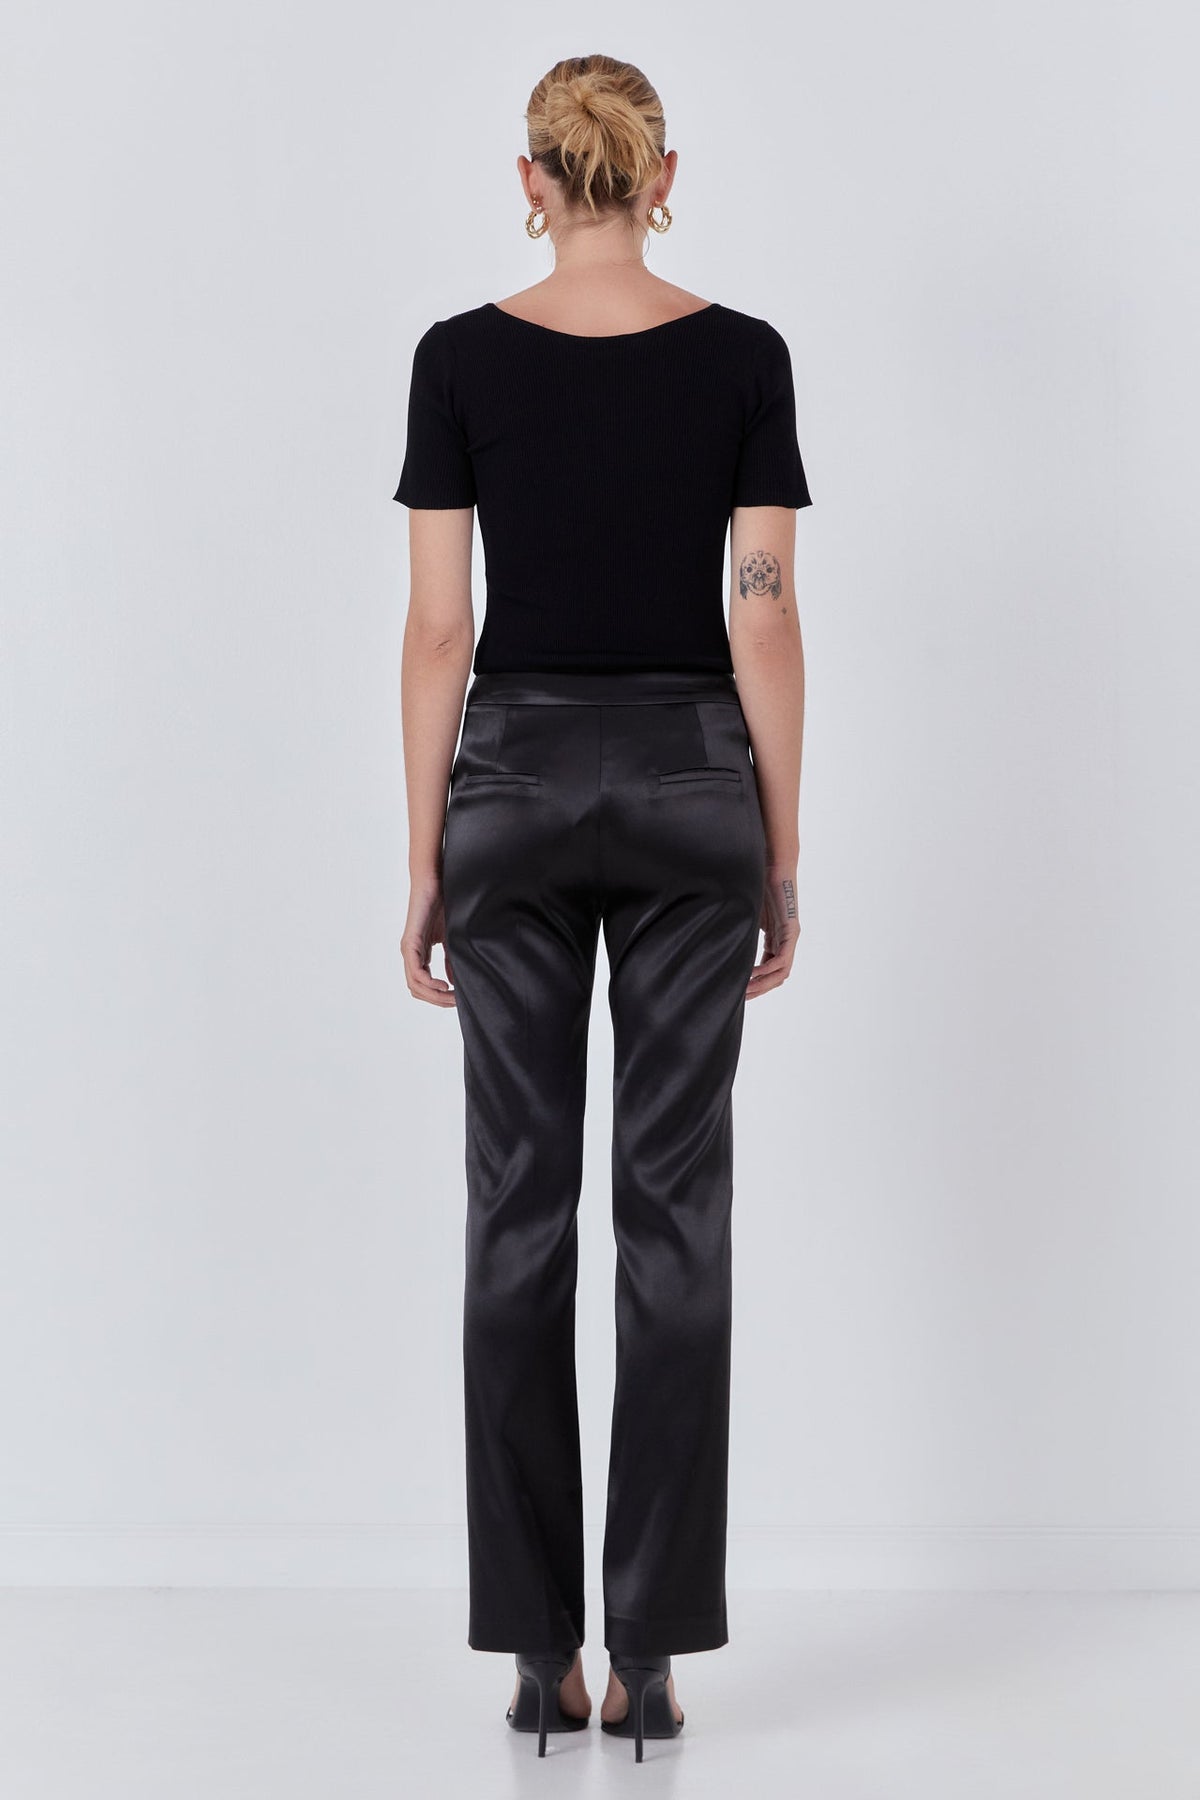 ENDLESS ROSE-Flared Solid Trouser-PANTS available at Objectrare